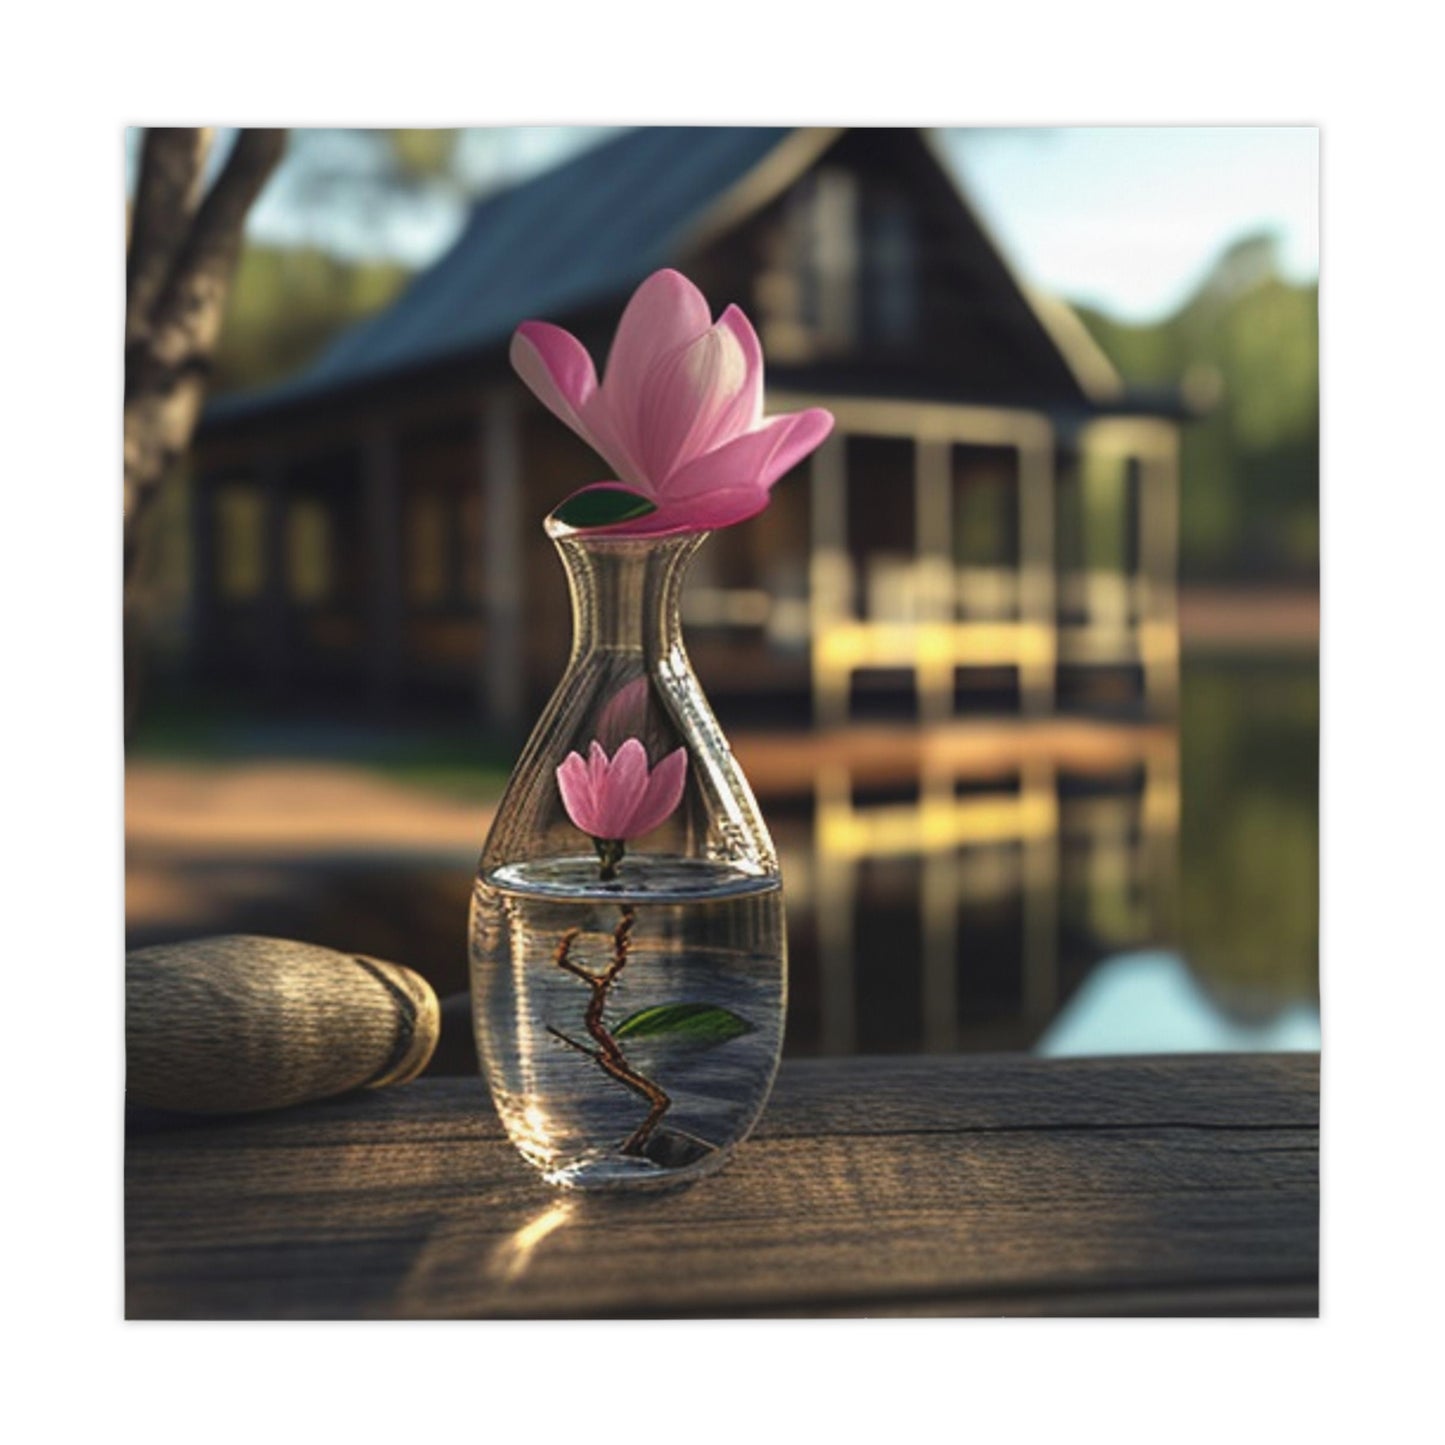 Tablecloth Magnolia in a Glass vase 4